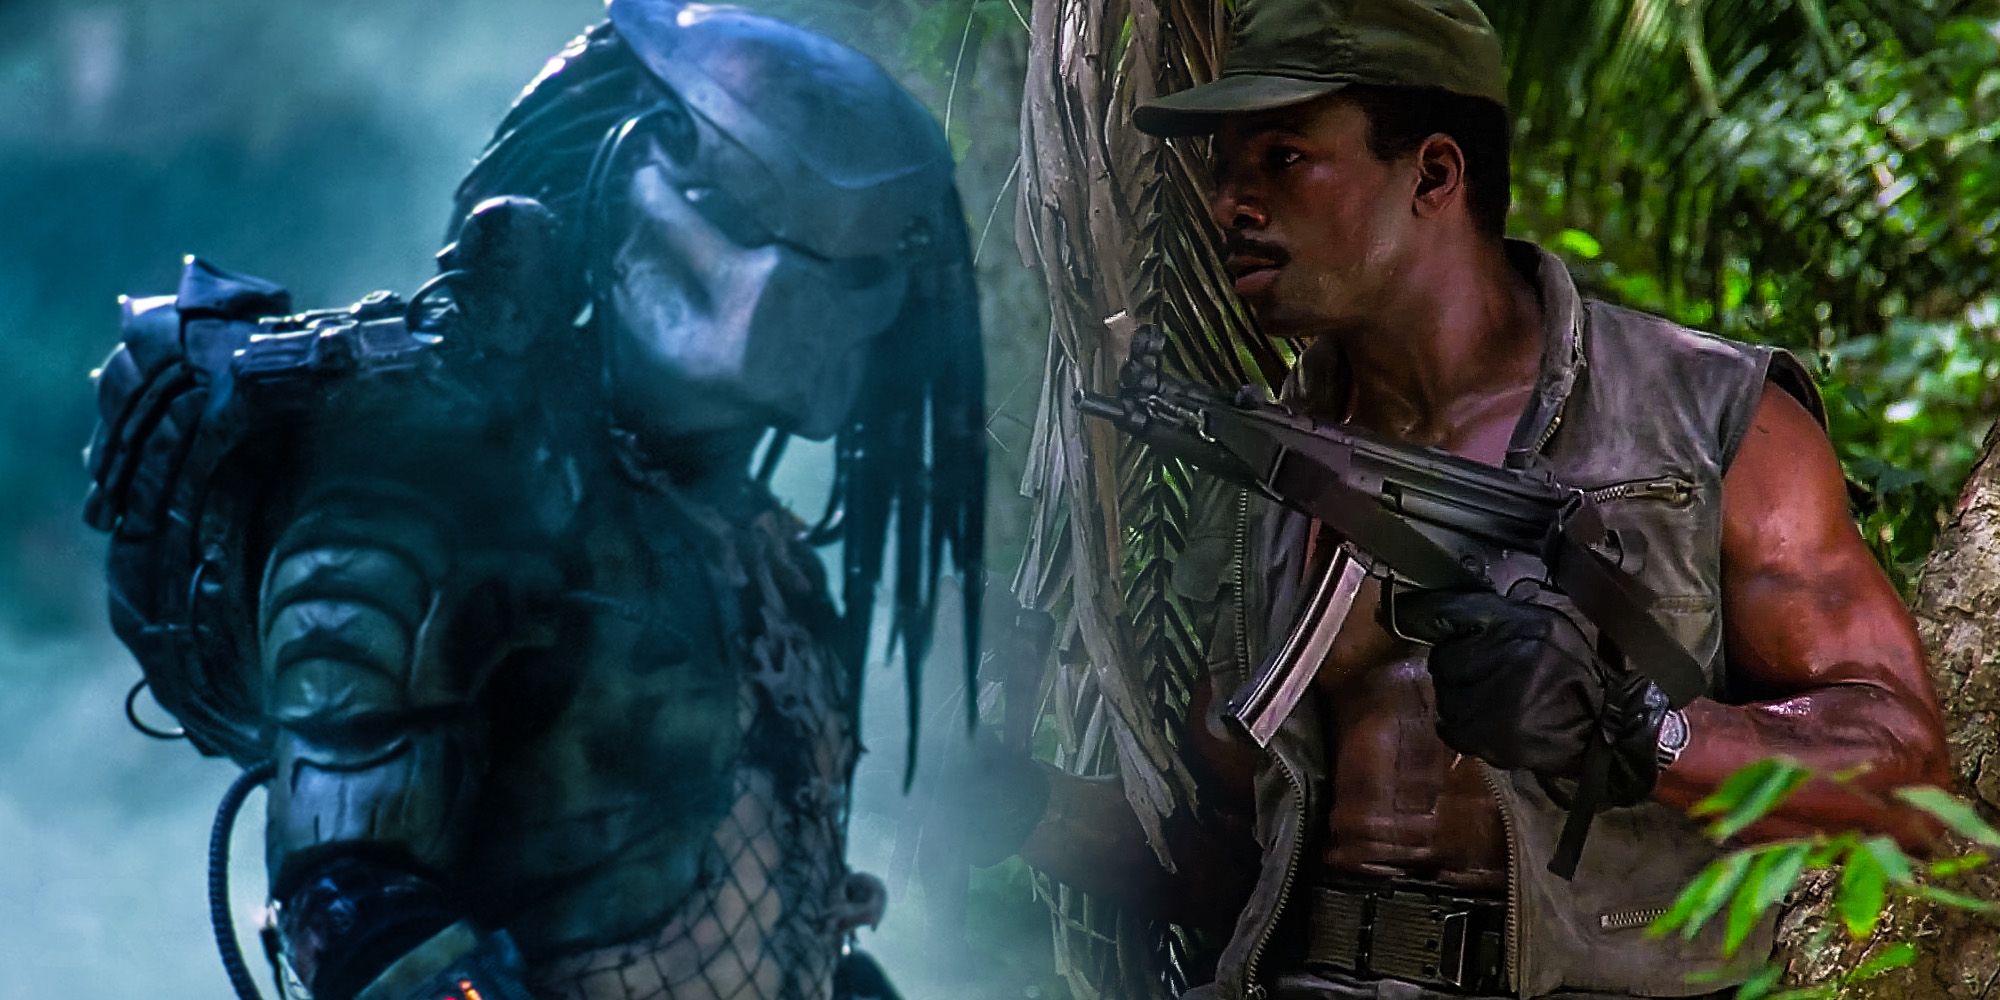 Aliens and Predators — supportingobjects: Dillon's tie. From Predator